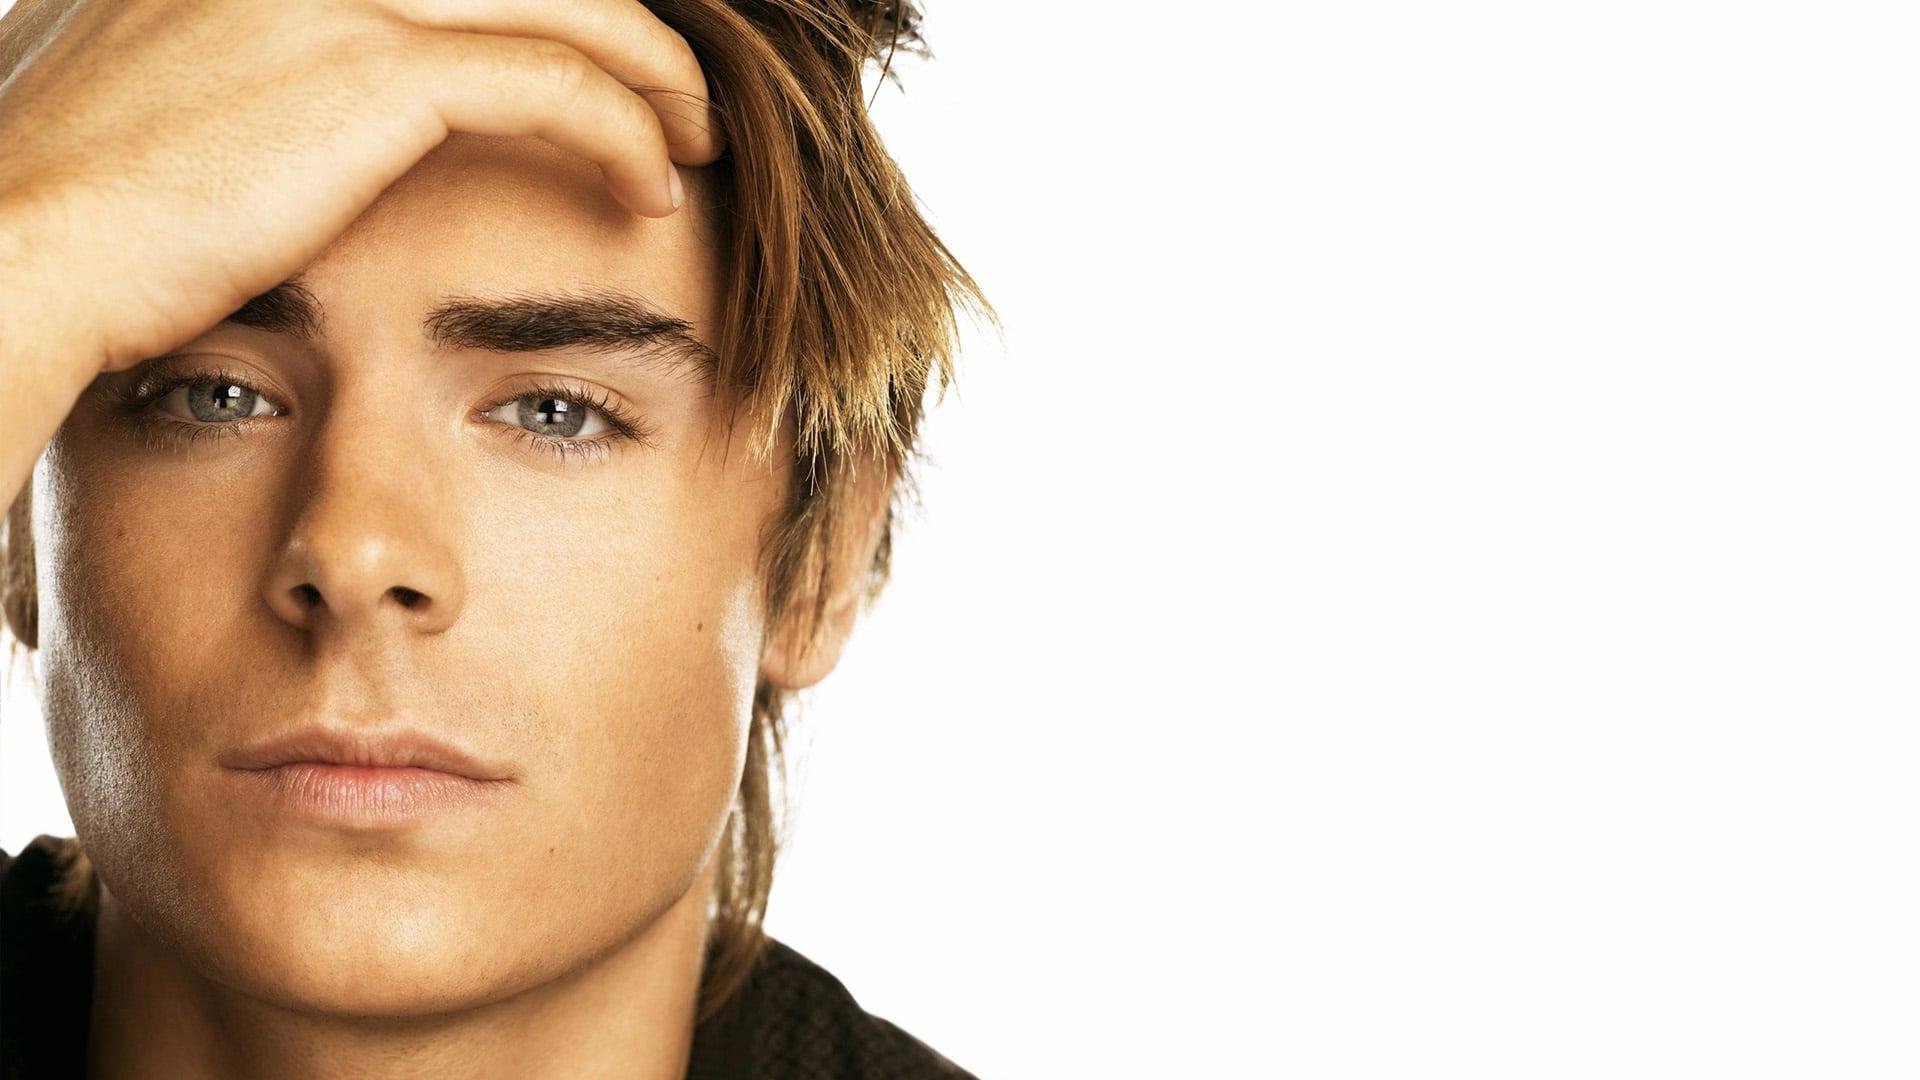 Zac Efron HD Zac Efron wallpaper for desktop and mobile